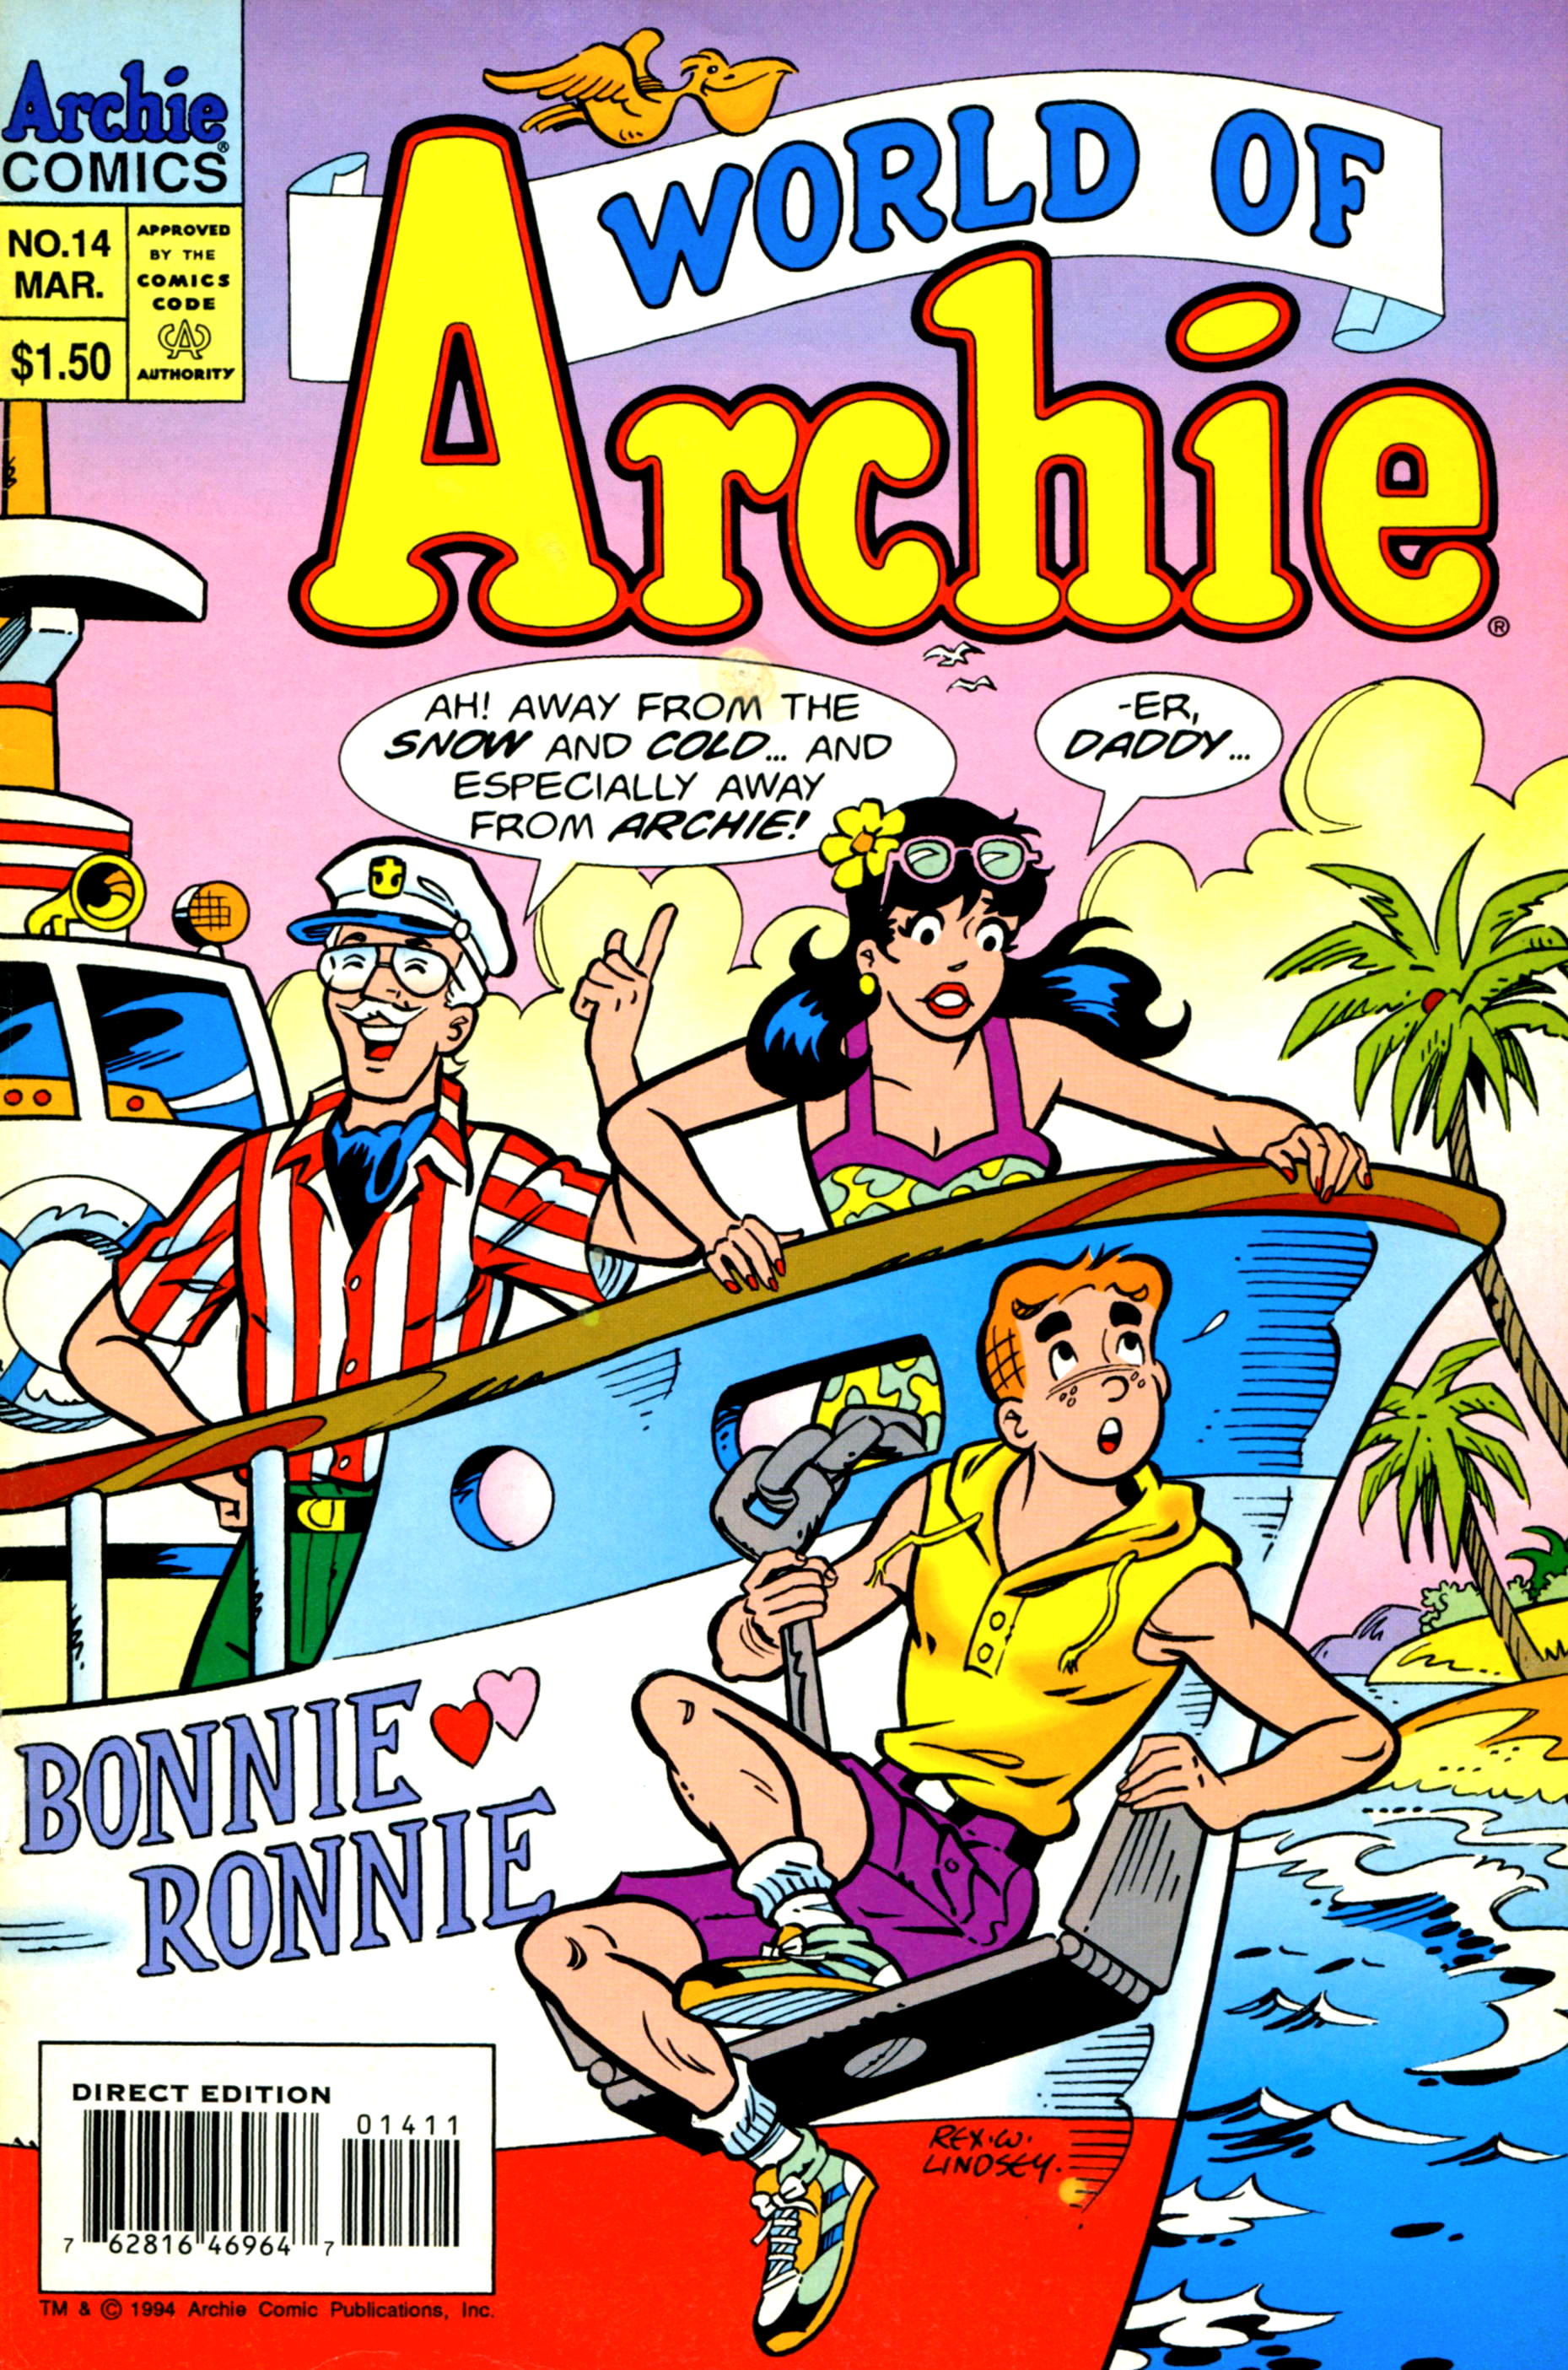 Read online World of Archie comic -  Issue #14 - 1